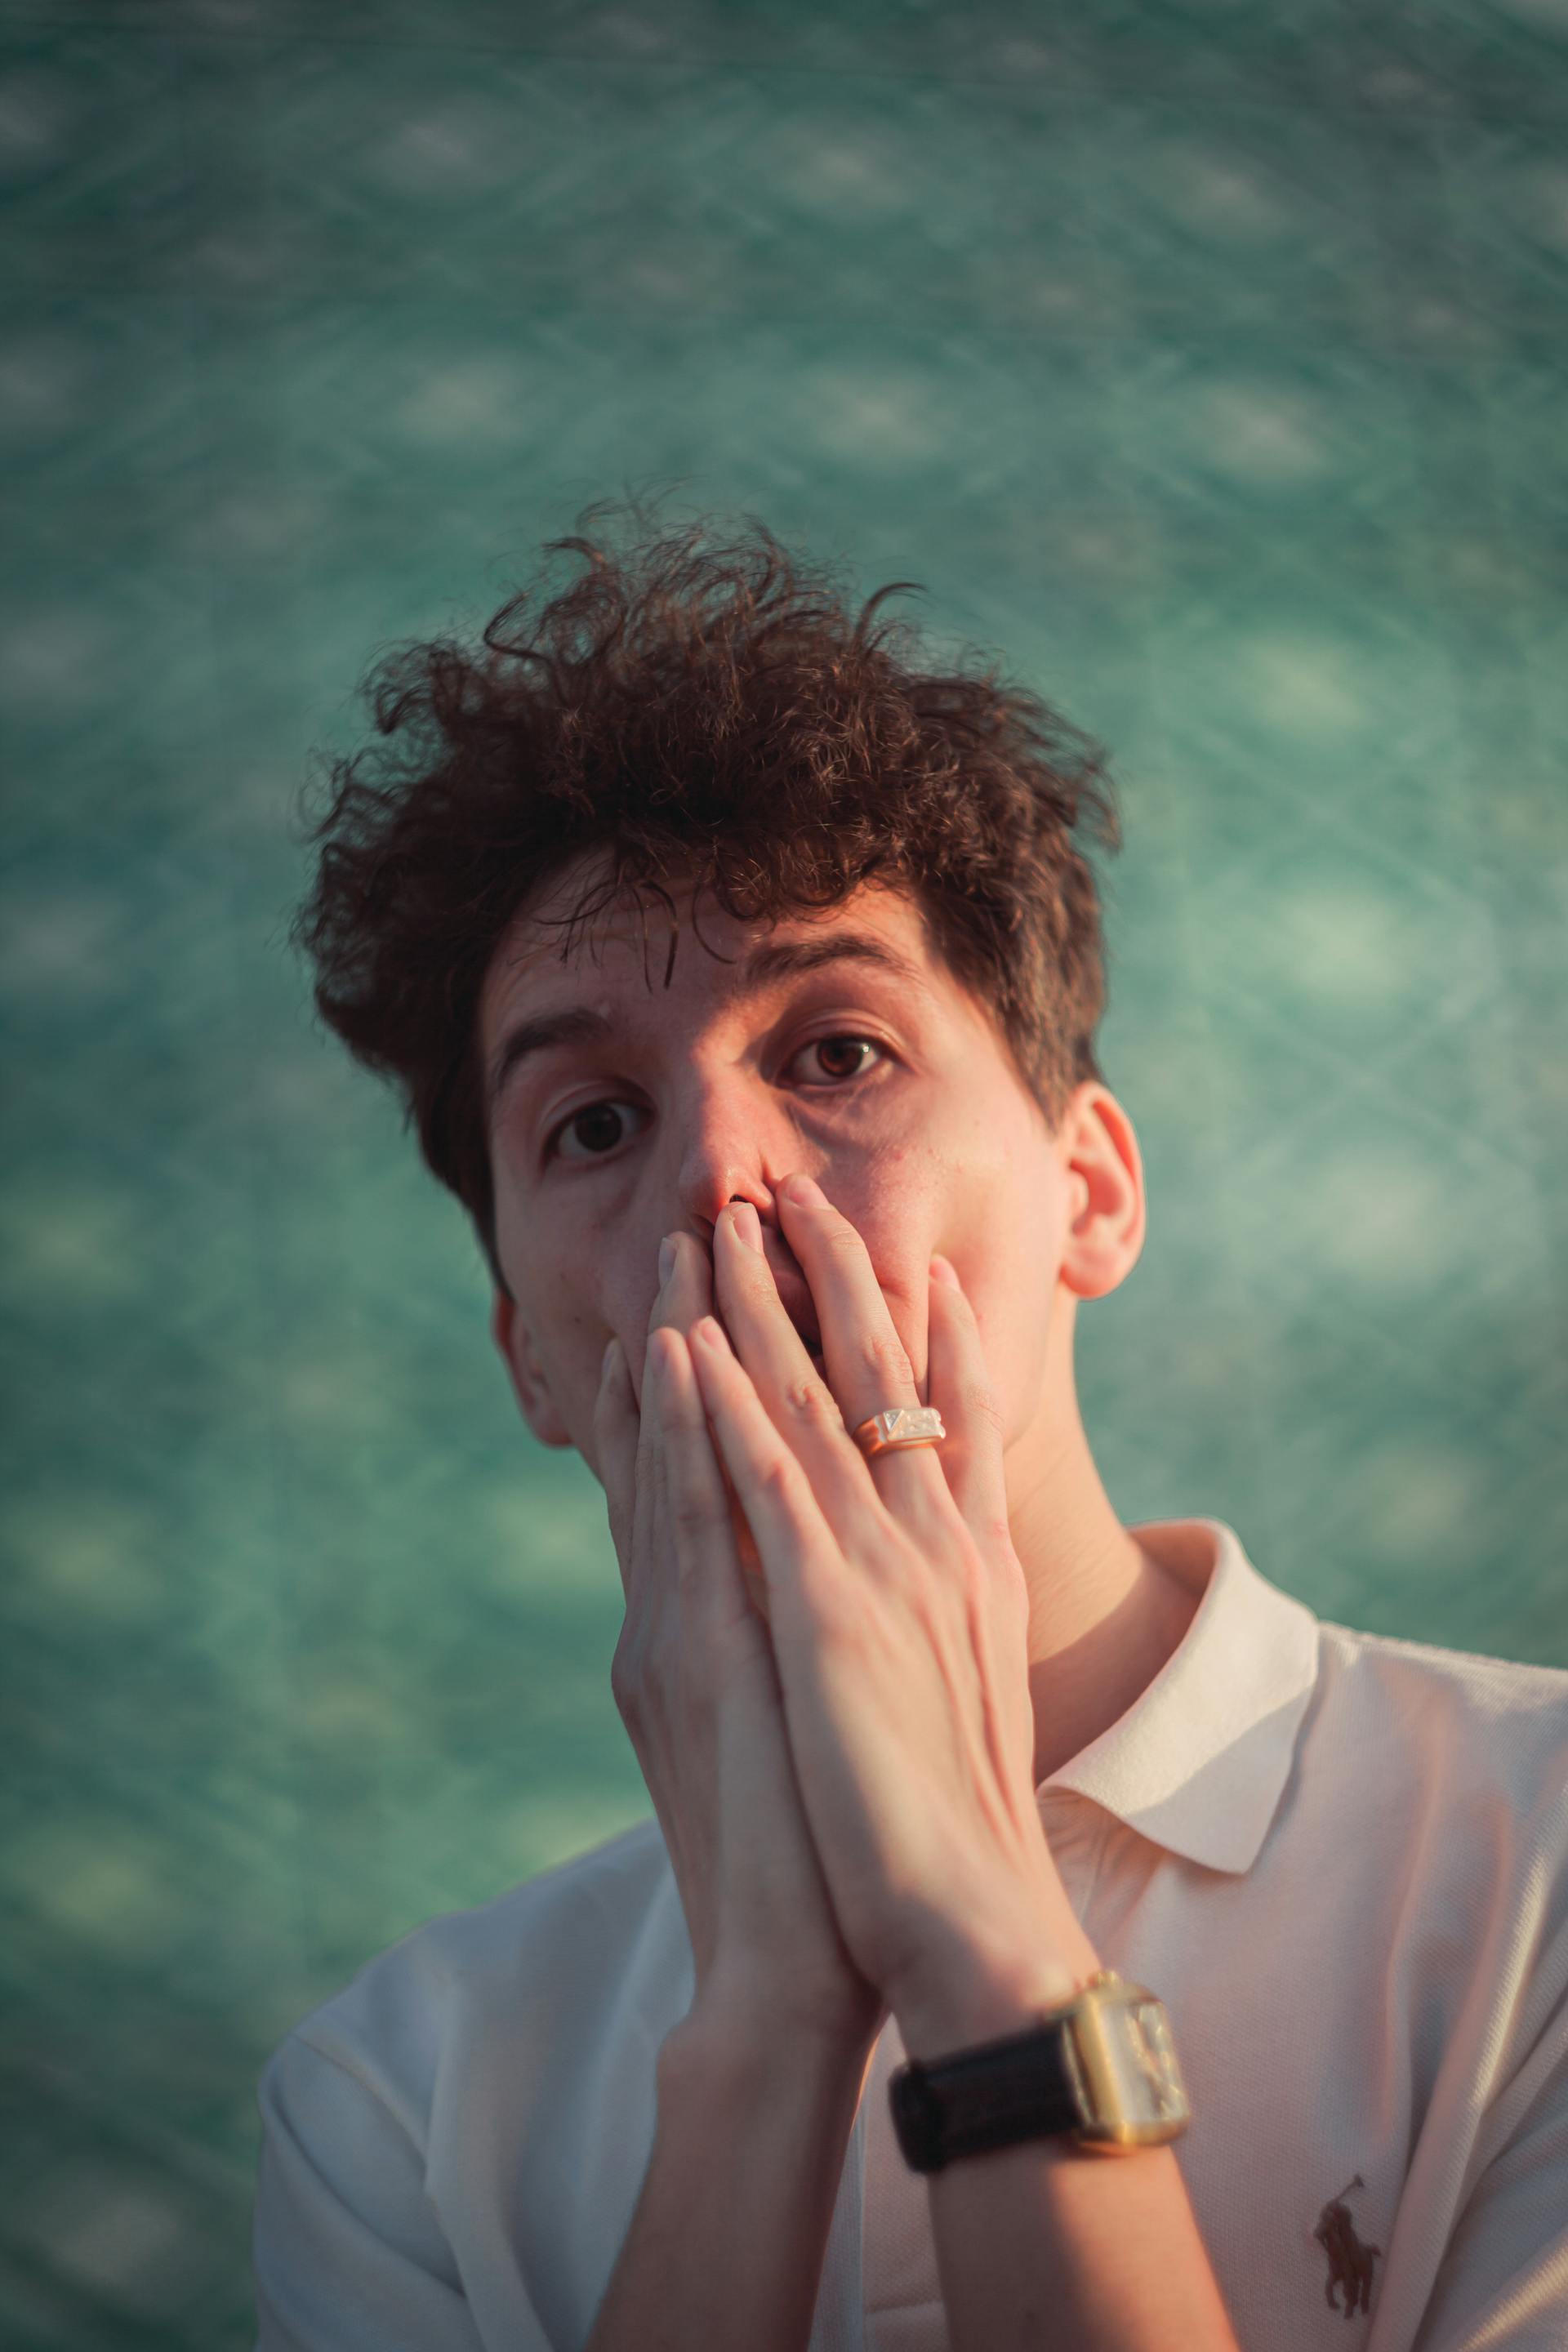 A shocked man covering his mouth | Source: Pexels